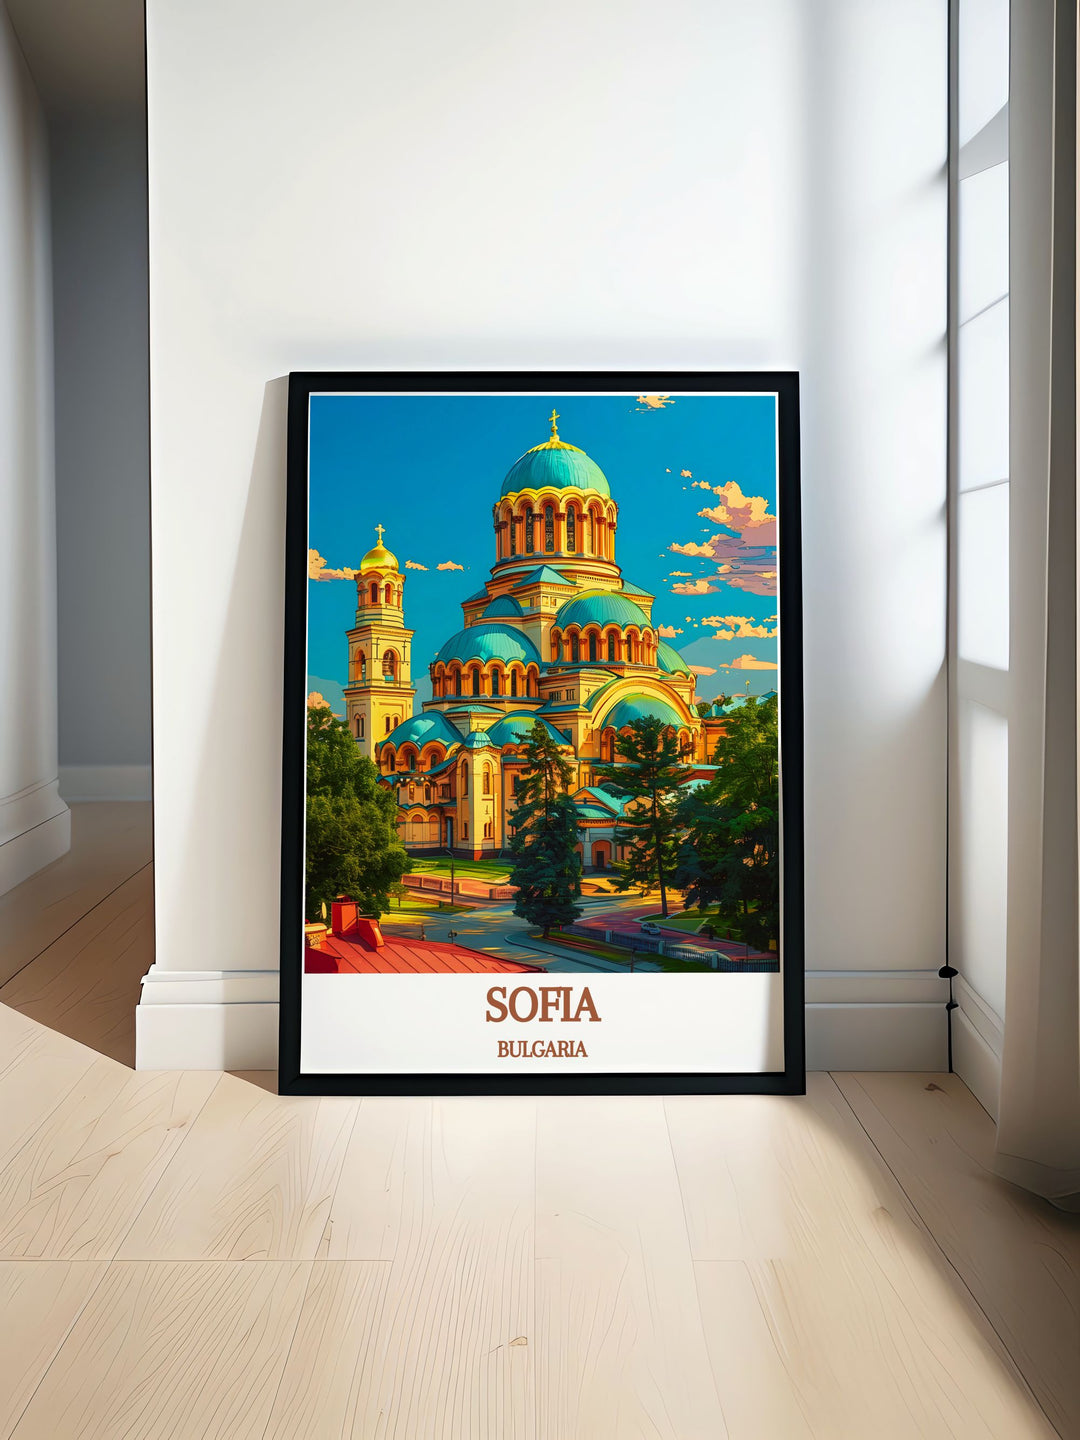 Stunning Sofia Print featuring BULGARIA St. Alexander Nevsky Cathedral showcasing its majestic domes and intricate architectural details perfect for enhancing your home decor with a touch of Bulgarian heritage.